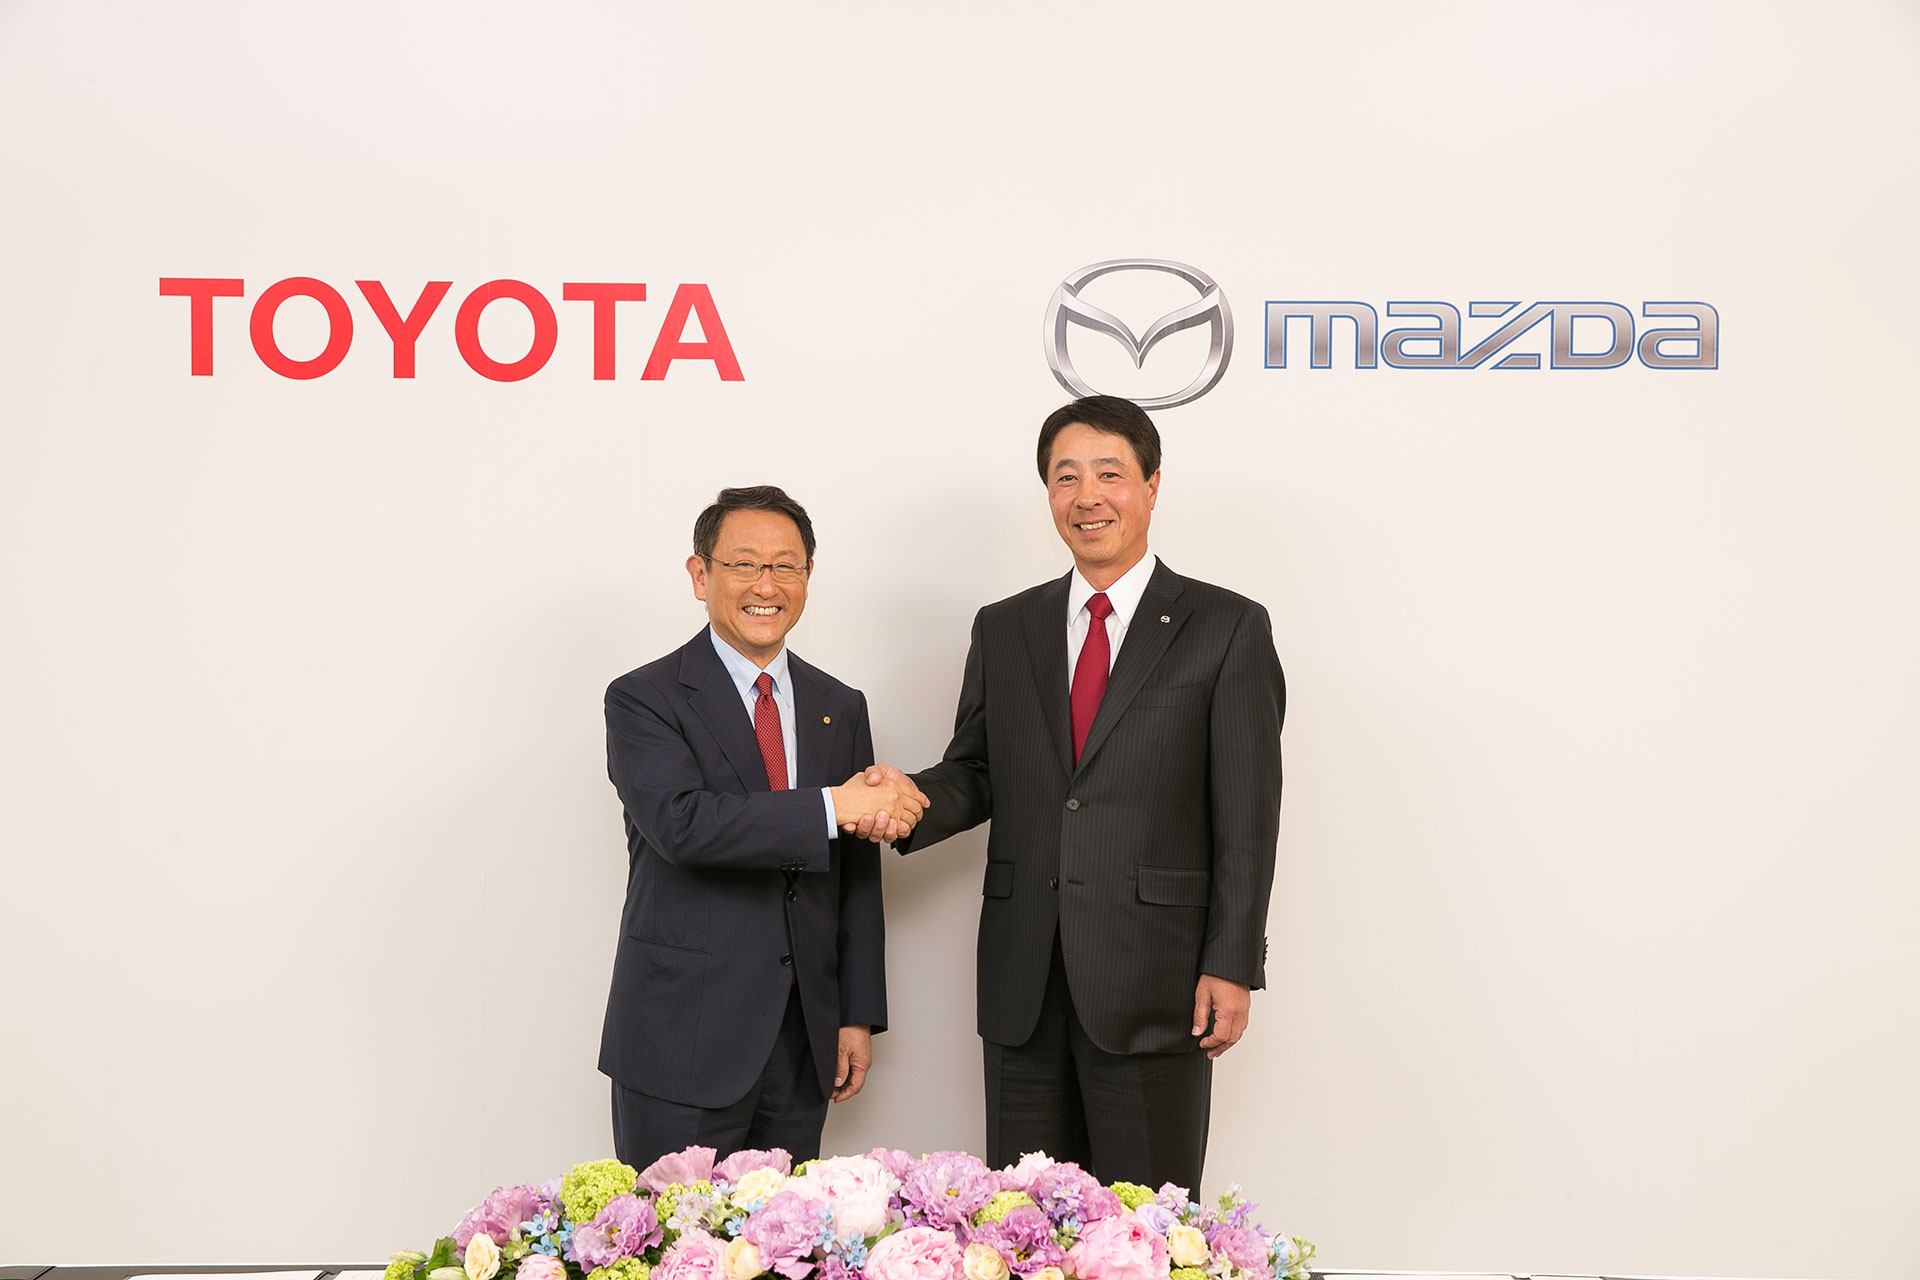 Signing of partnership agreement between Mazda and Toyota. Left: Toyota President and CEO Akio Toyoda, right: Mazda President and CEO Masamichi Kogai